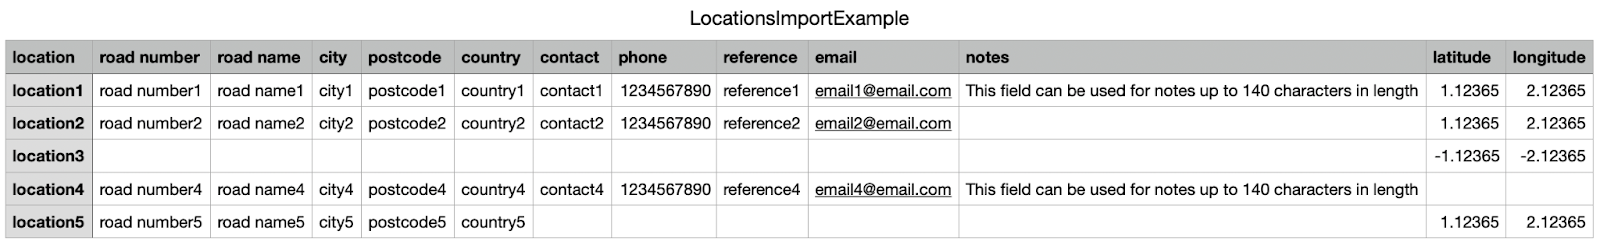 The example file contains all the fields which can be populated when adding a location. 